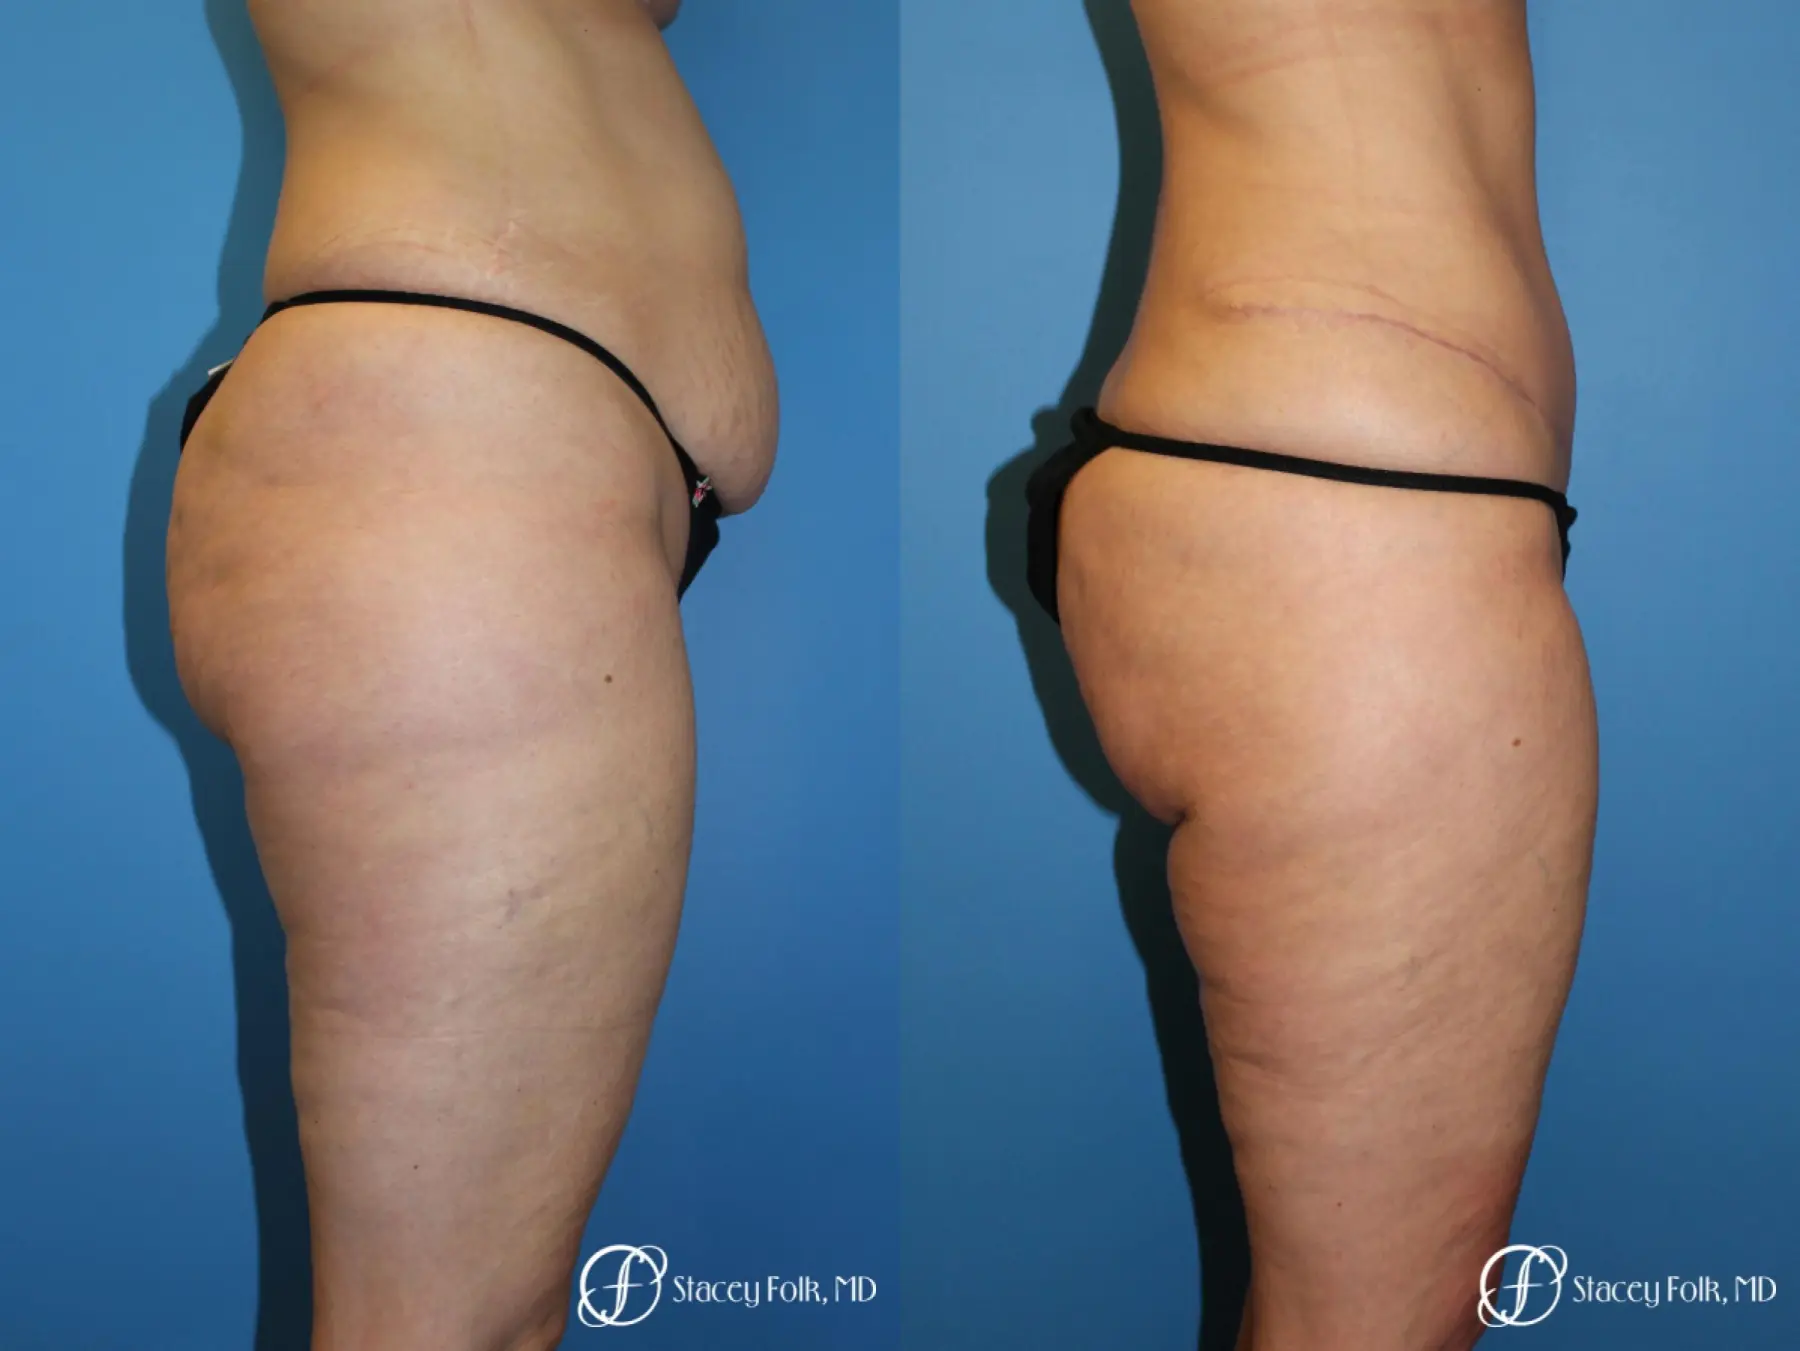 Tummy Tuck - Abdominoplasty - Before and After 3